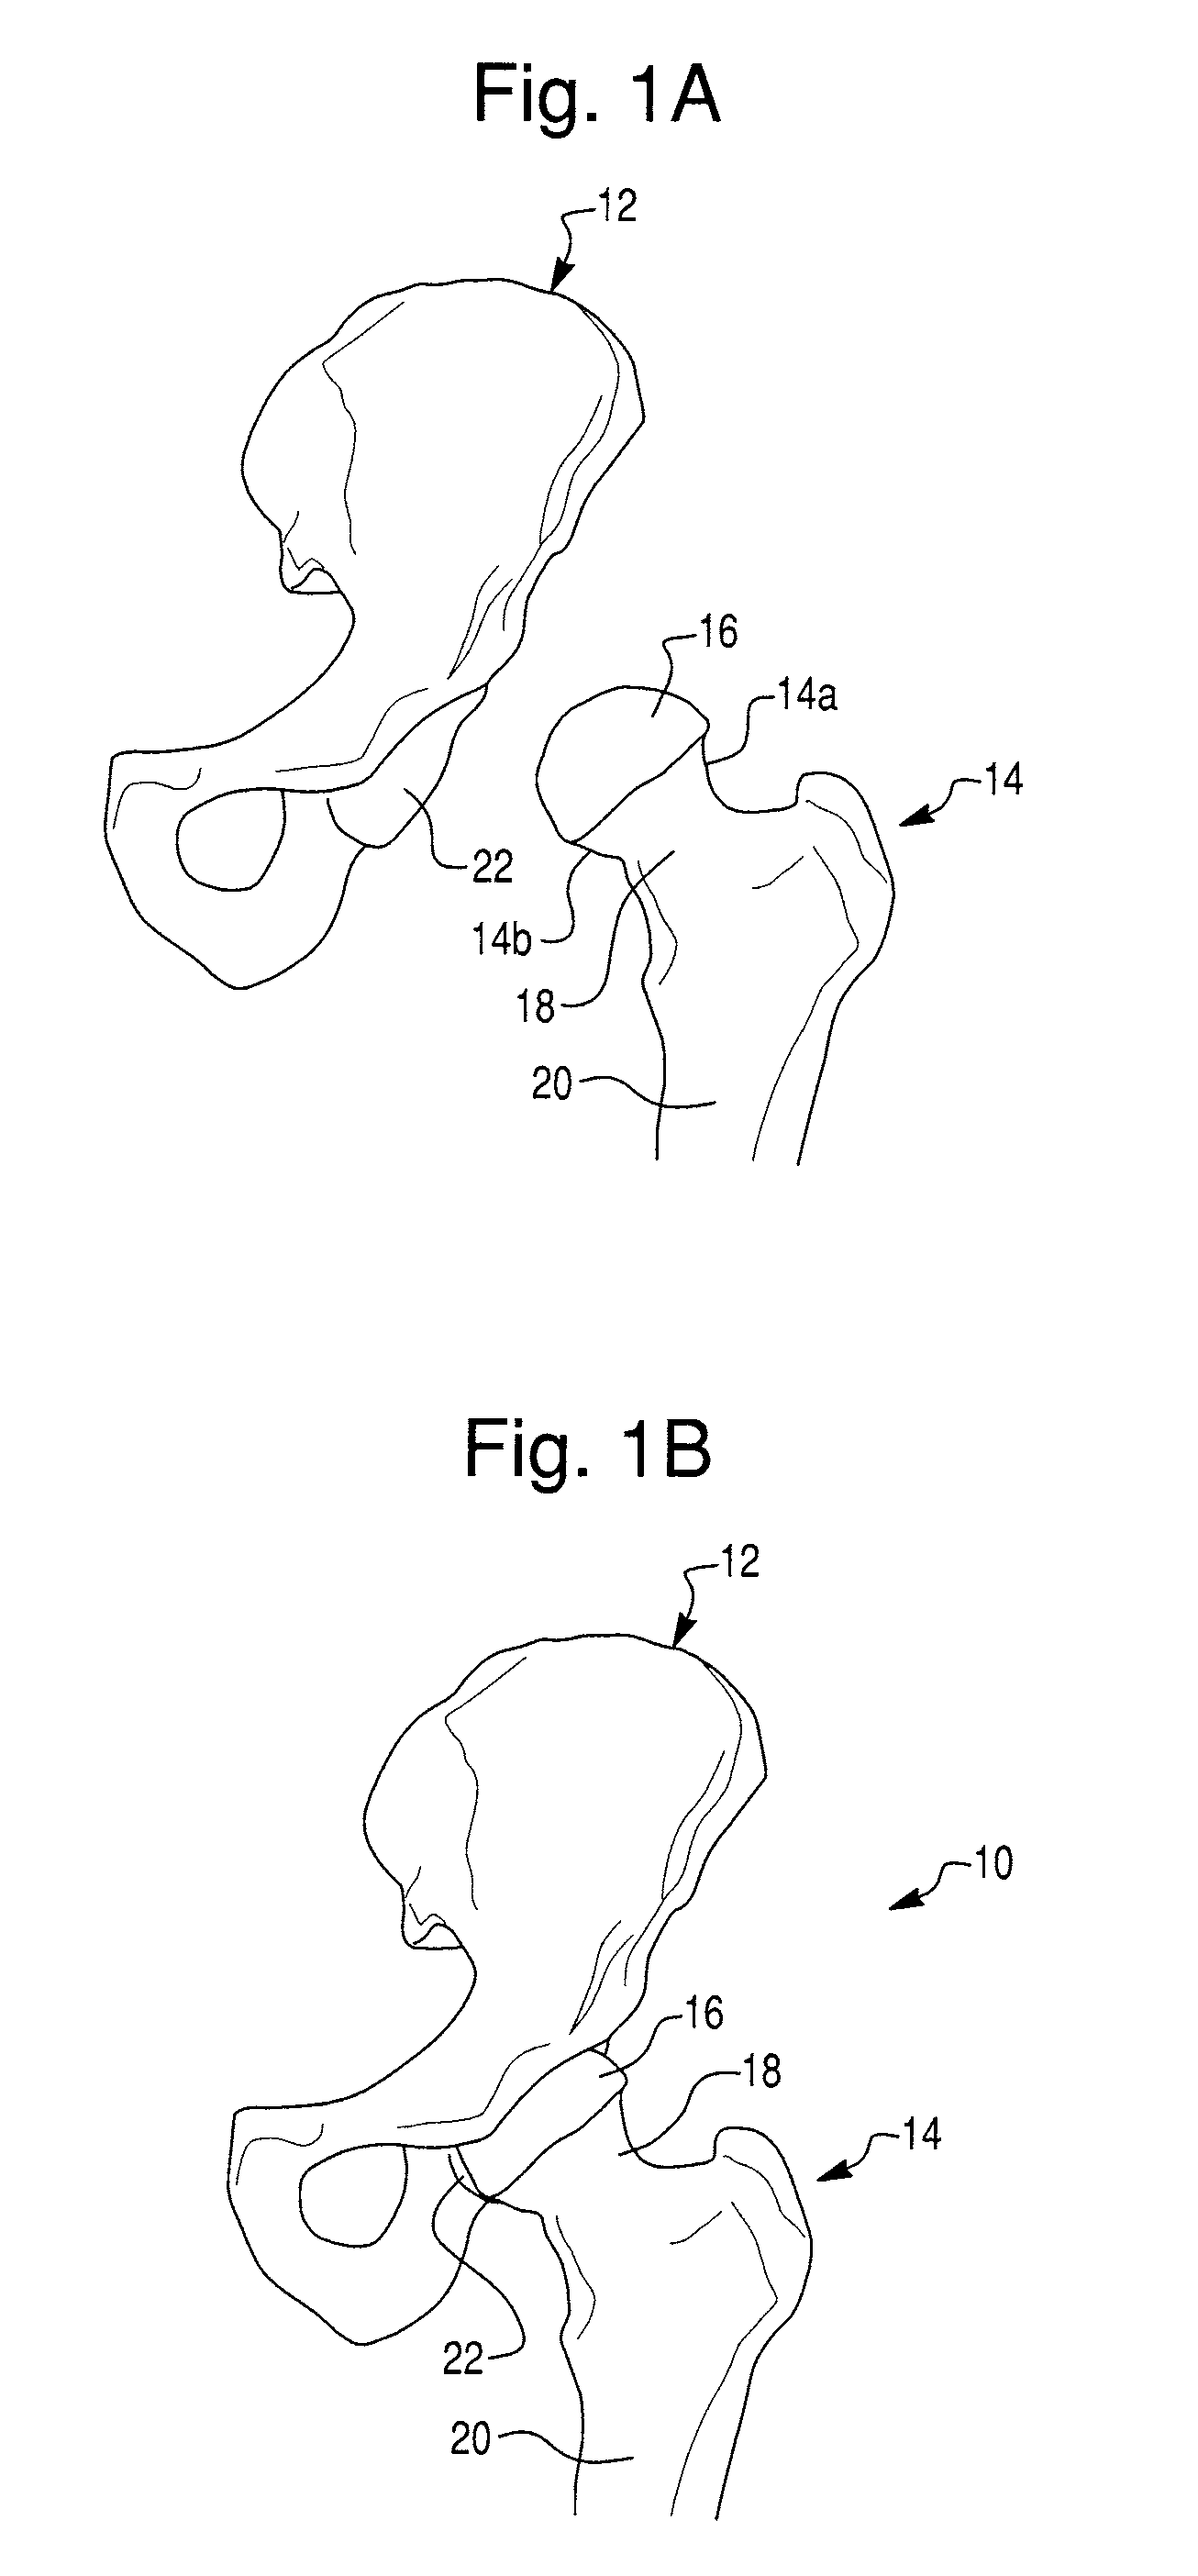 Prosthetic device and system for preparing a bone to receive a prosthetic device